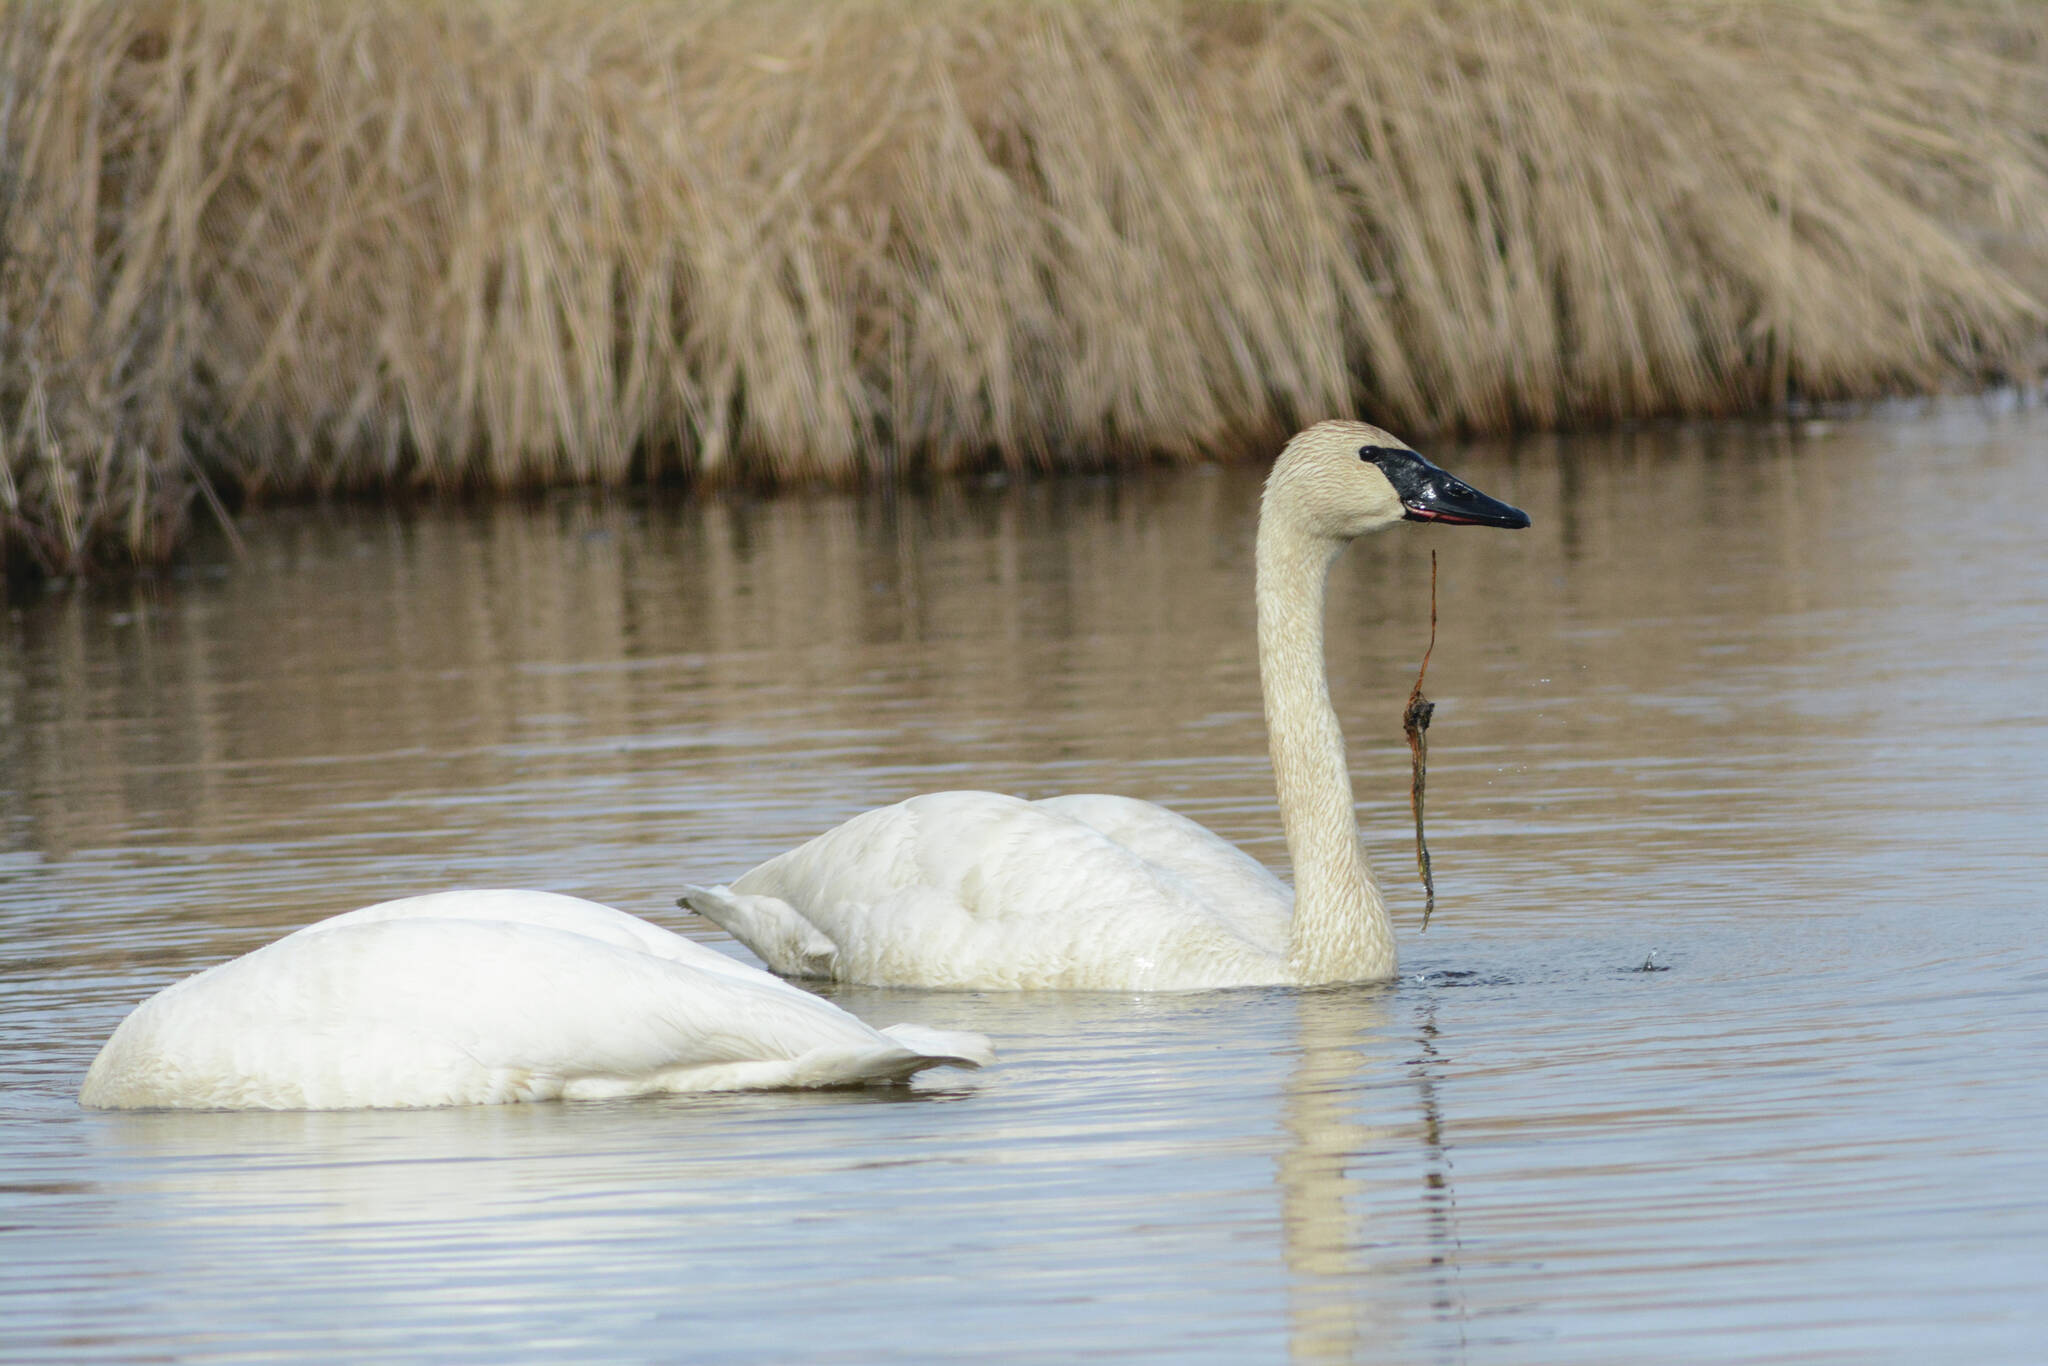 Two trumpeter swans feed in Beluga Lake on Sunday, May 9, 2021, in Homer, Alaska. (Photo by Michael Armstrong/Homer News)